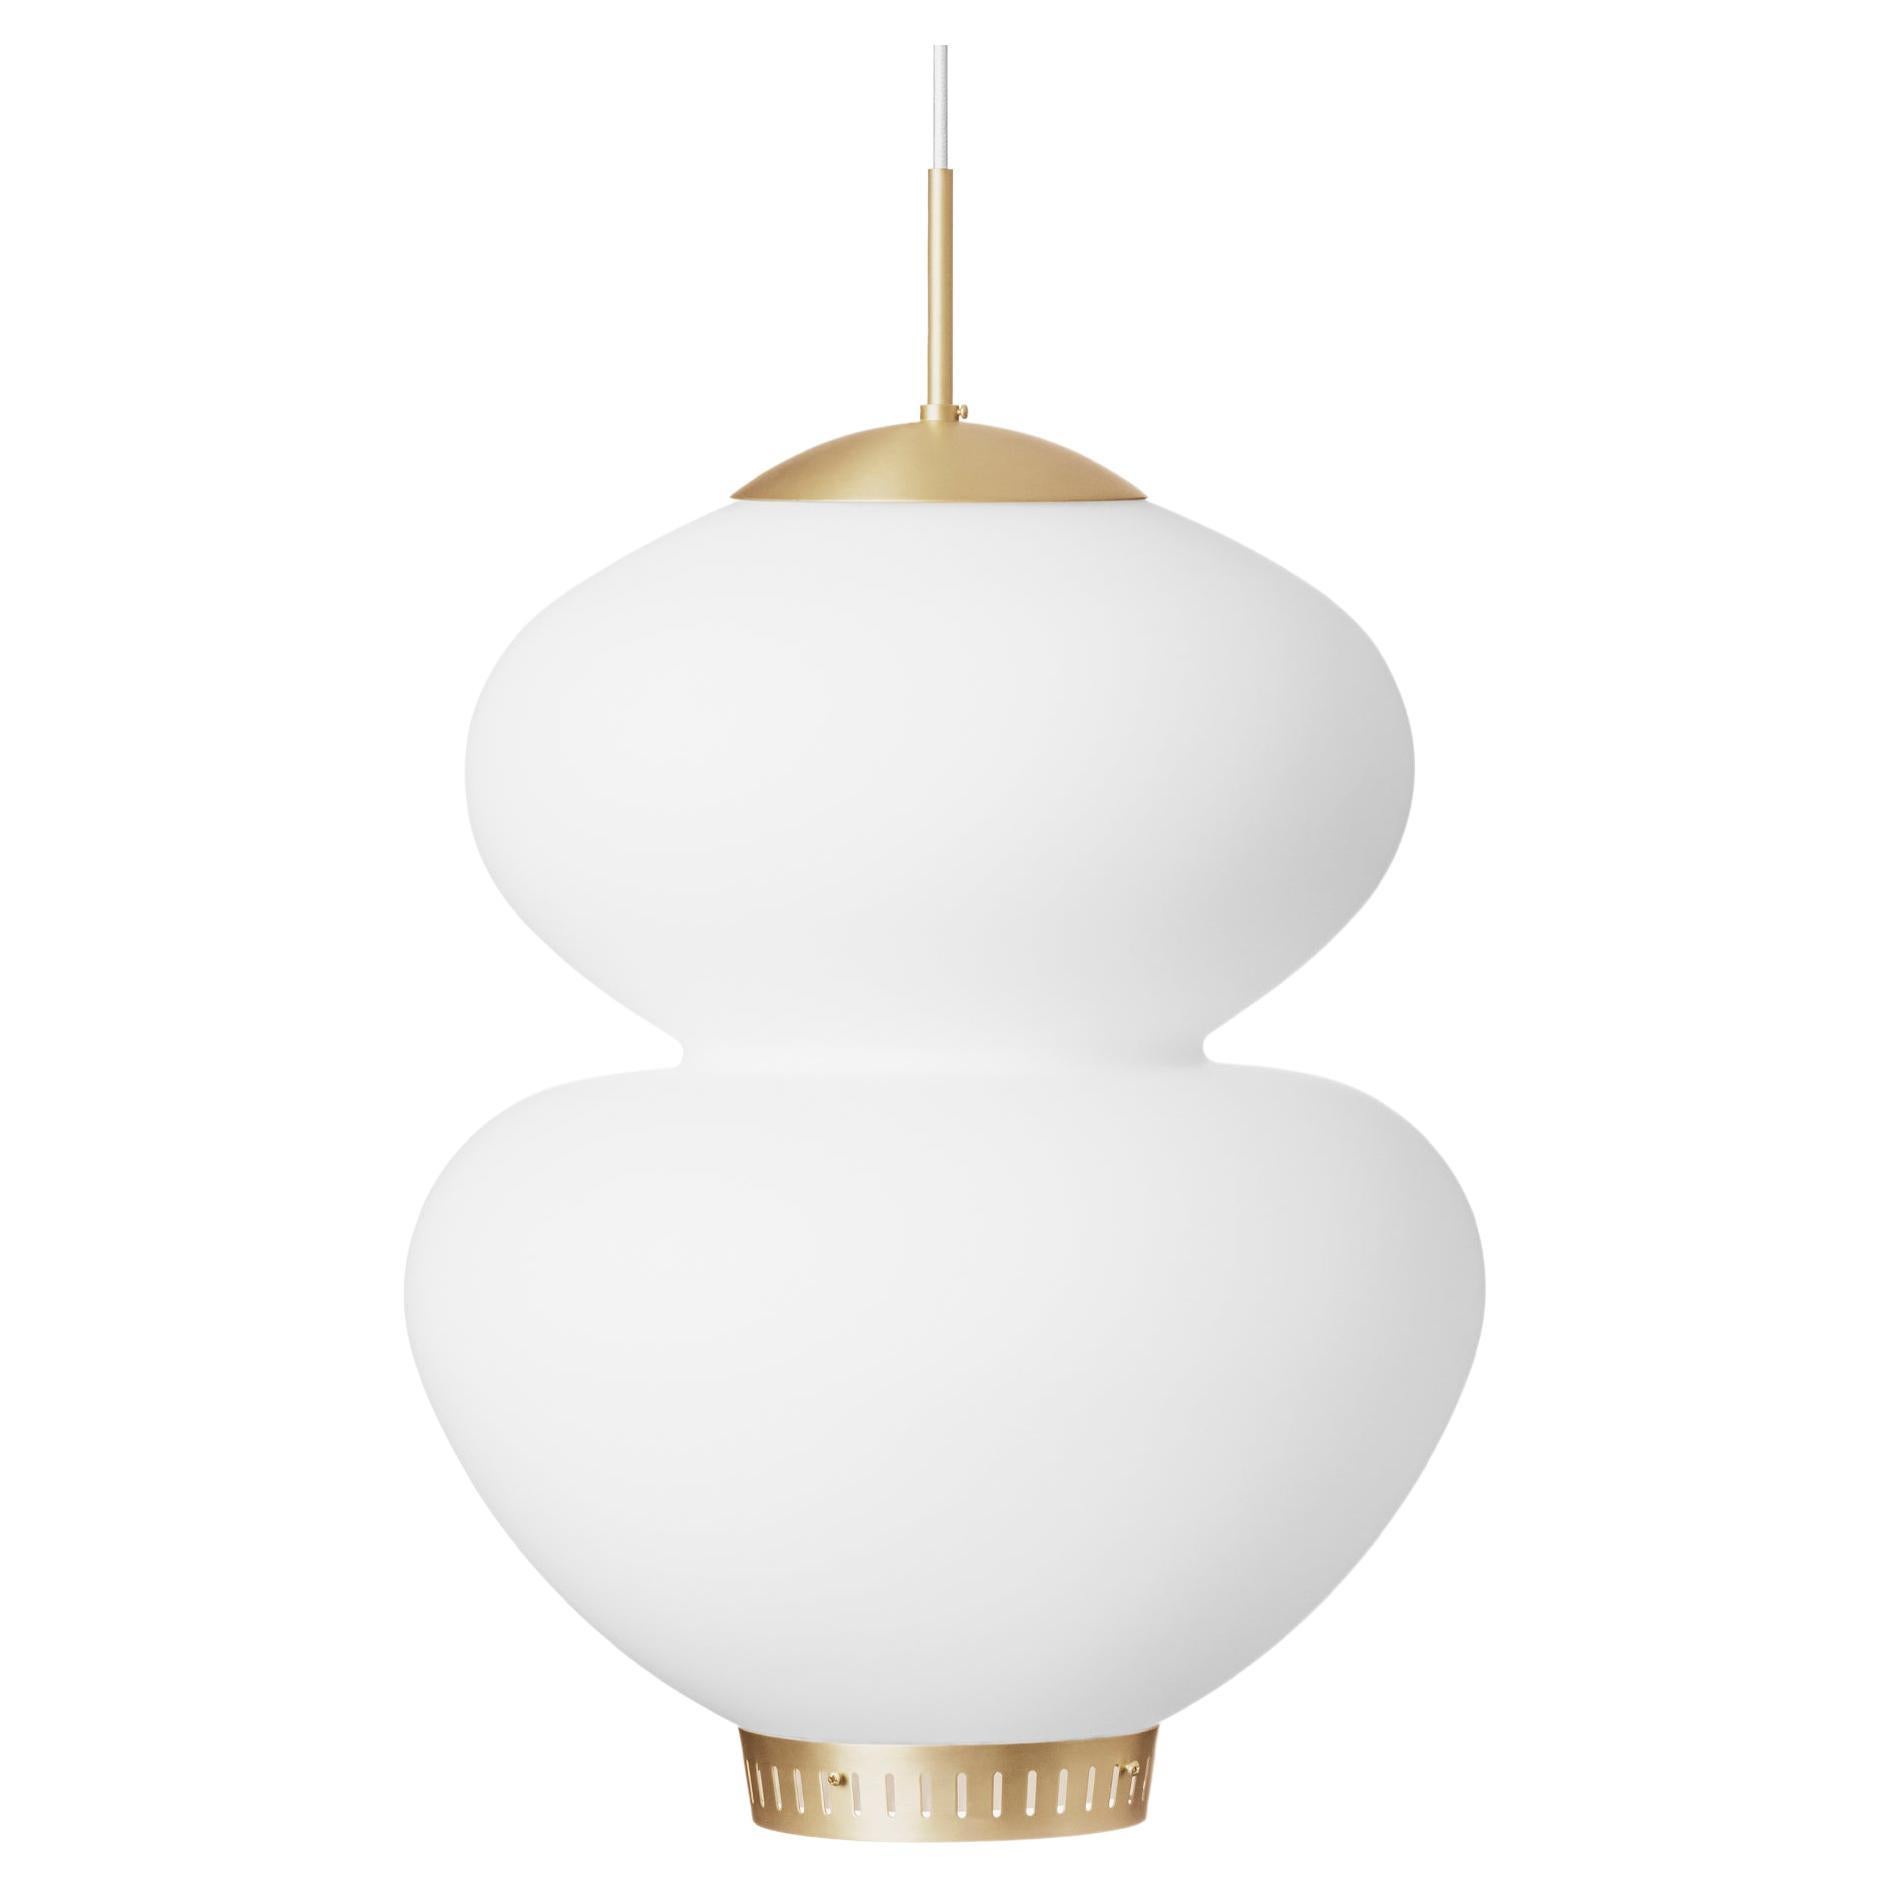 'Peanut 175' Pendant Lamp by Bent Karlby for Lyfa 'New Edition' For Sale